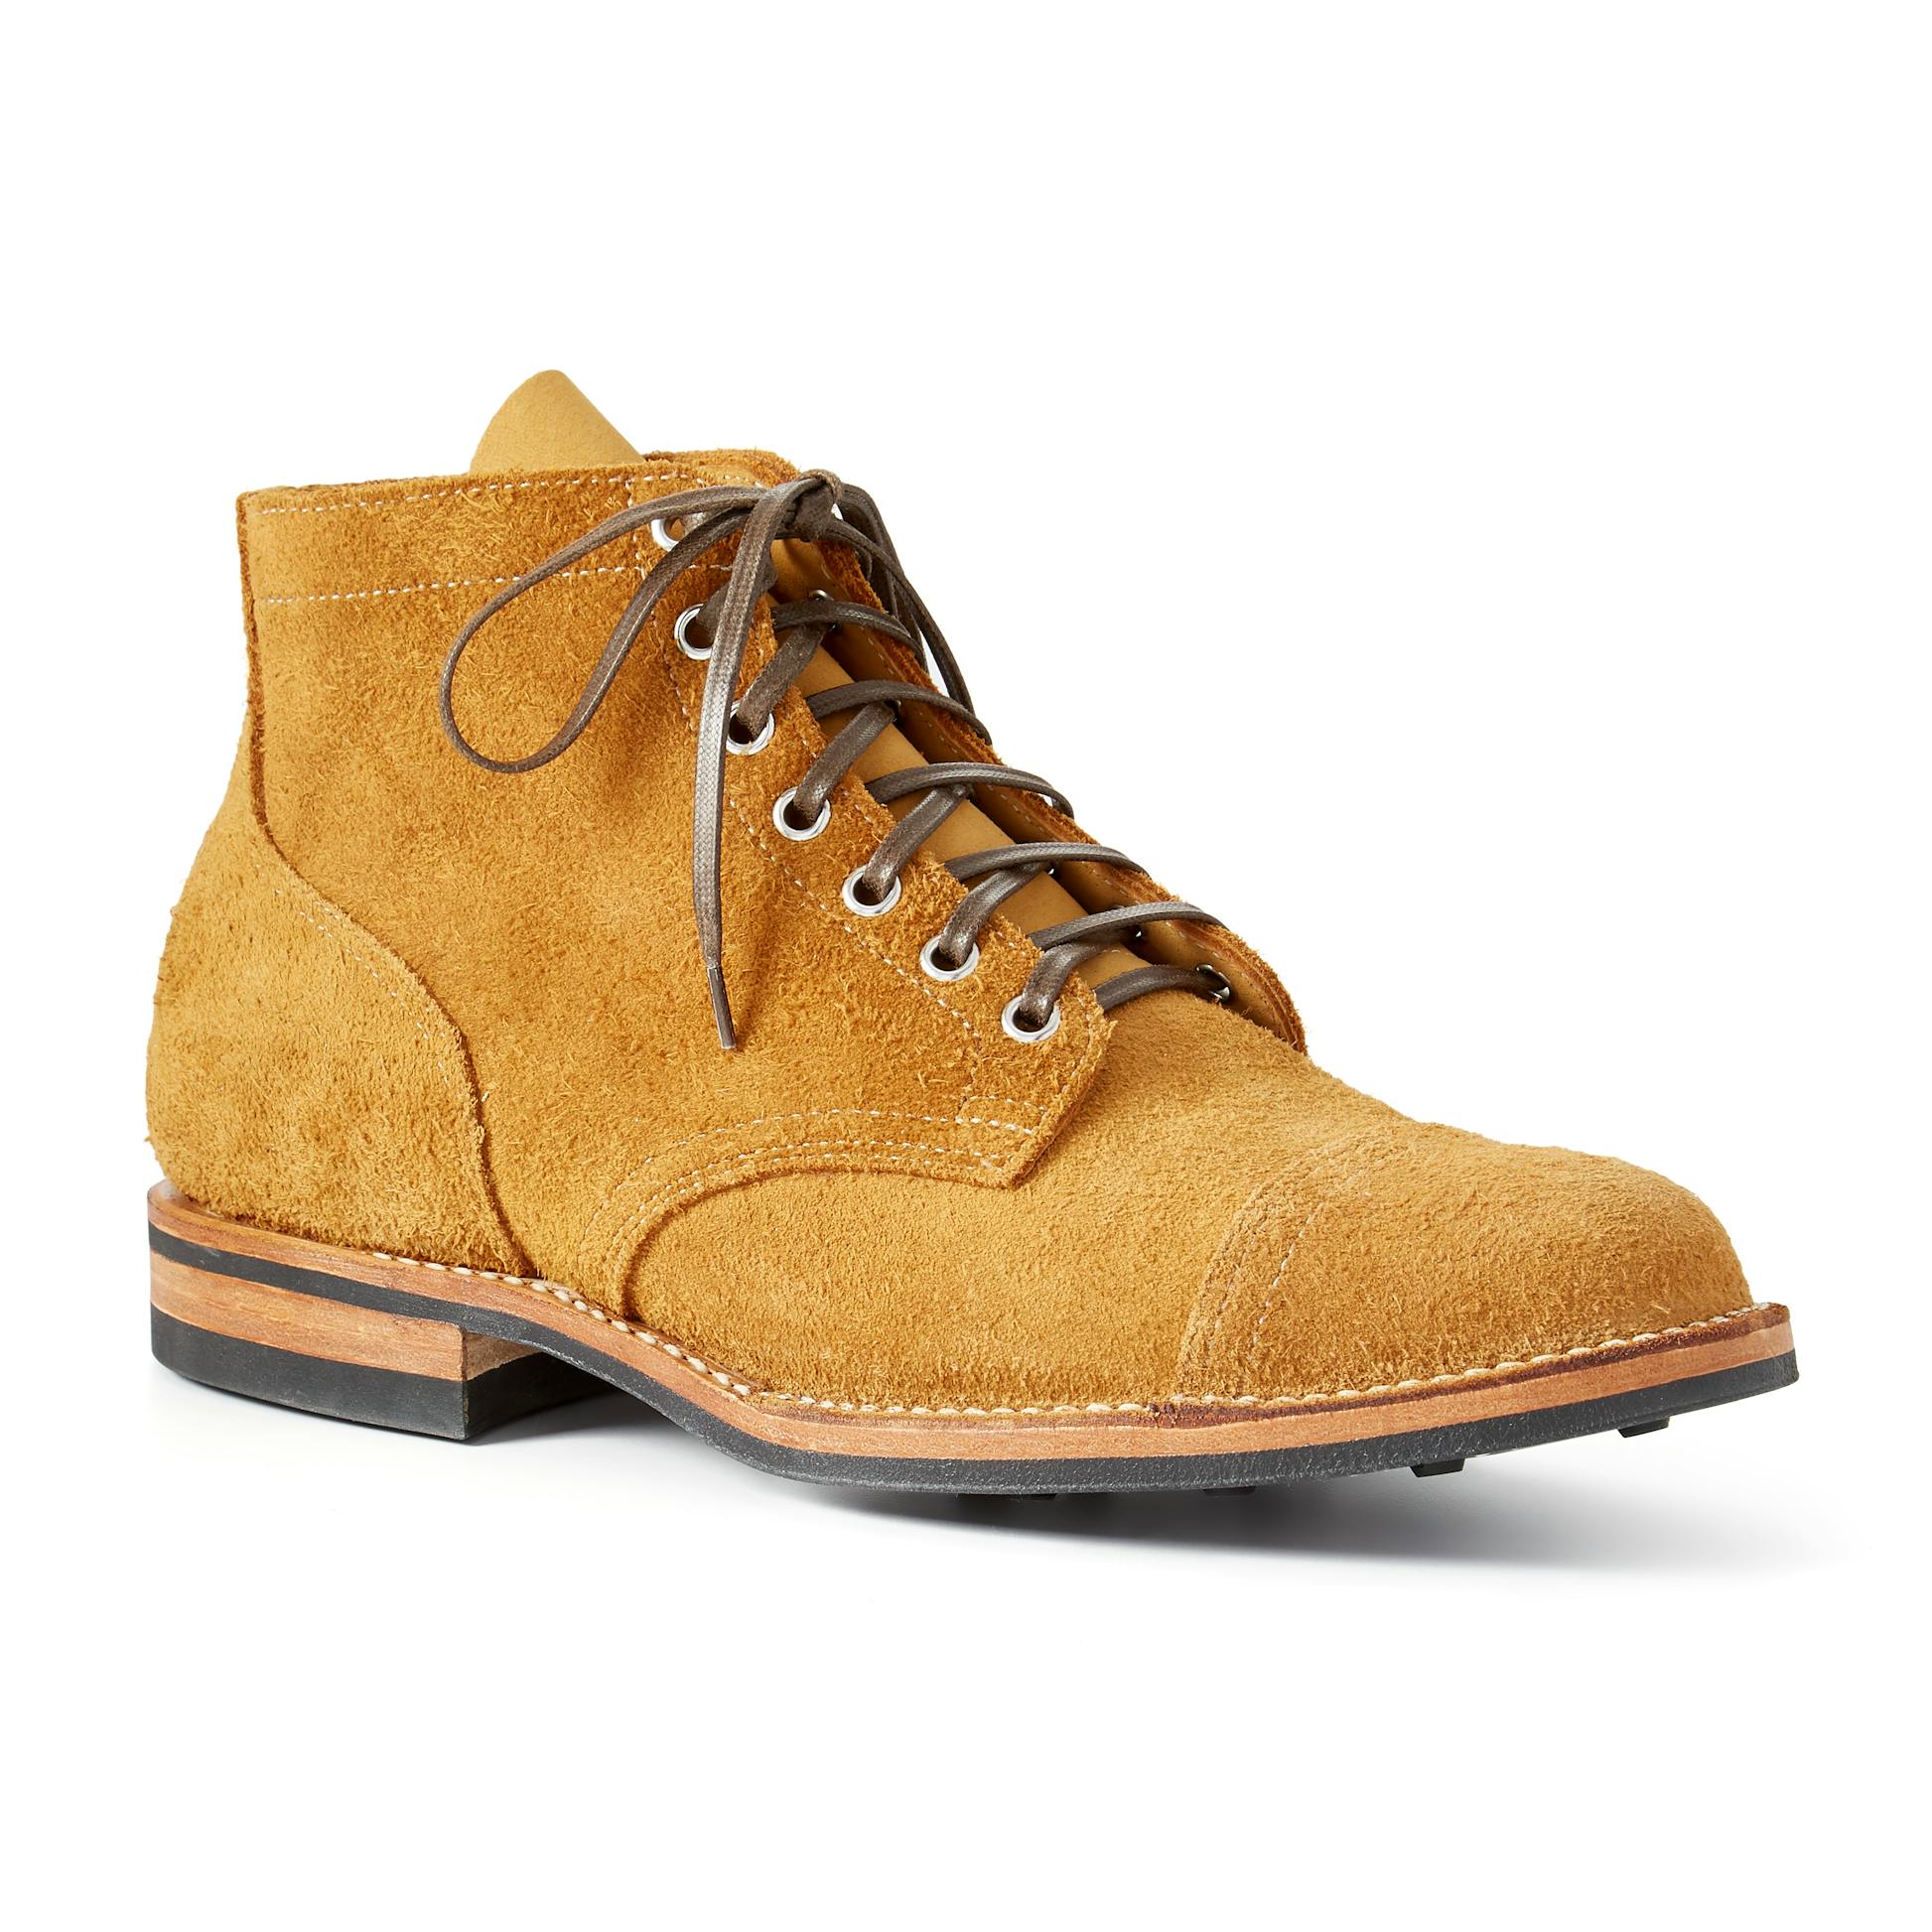 Viberg Service Boot (2030 last) - Exclusive - Wheat Rough Out | Work ...